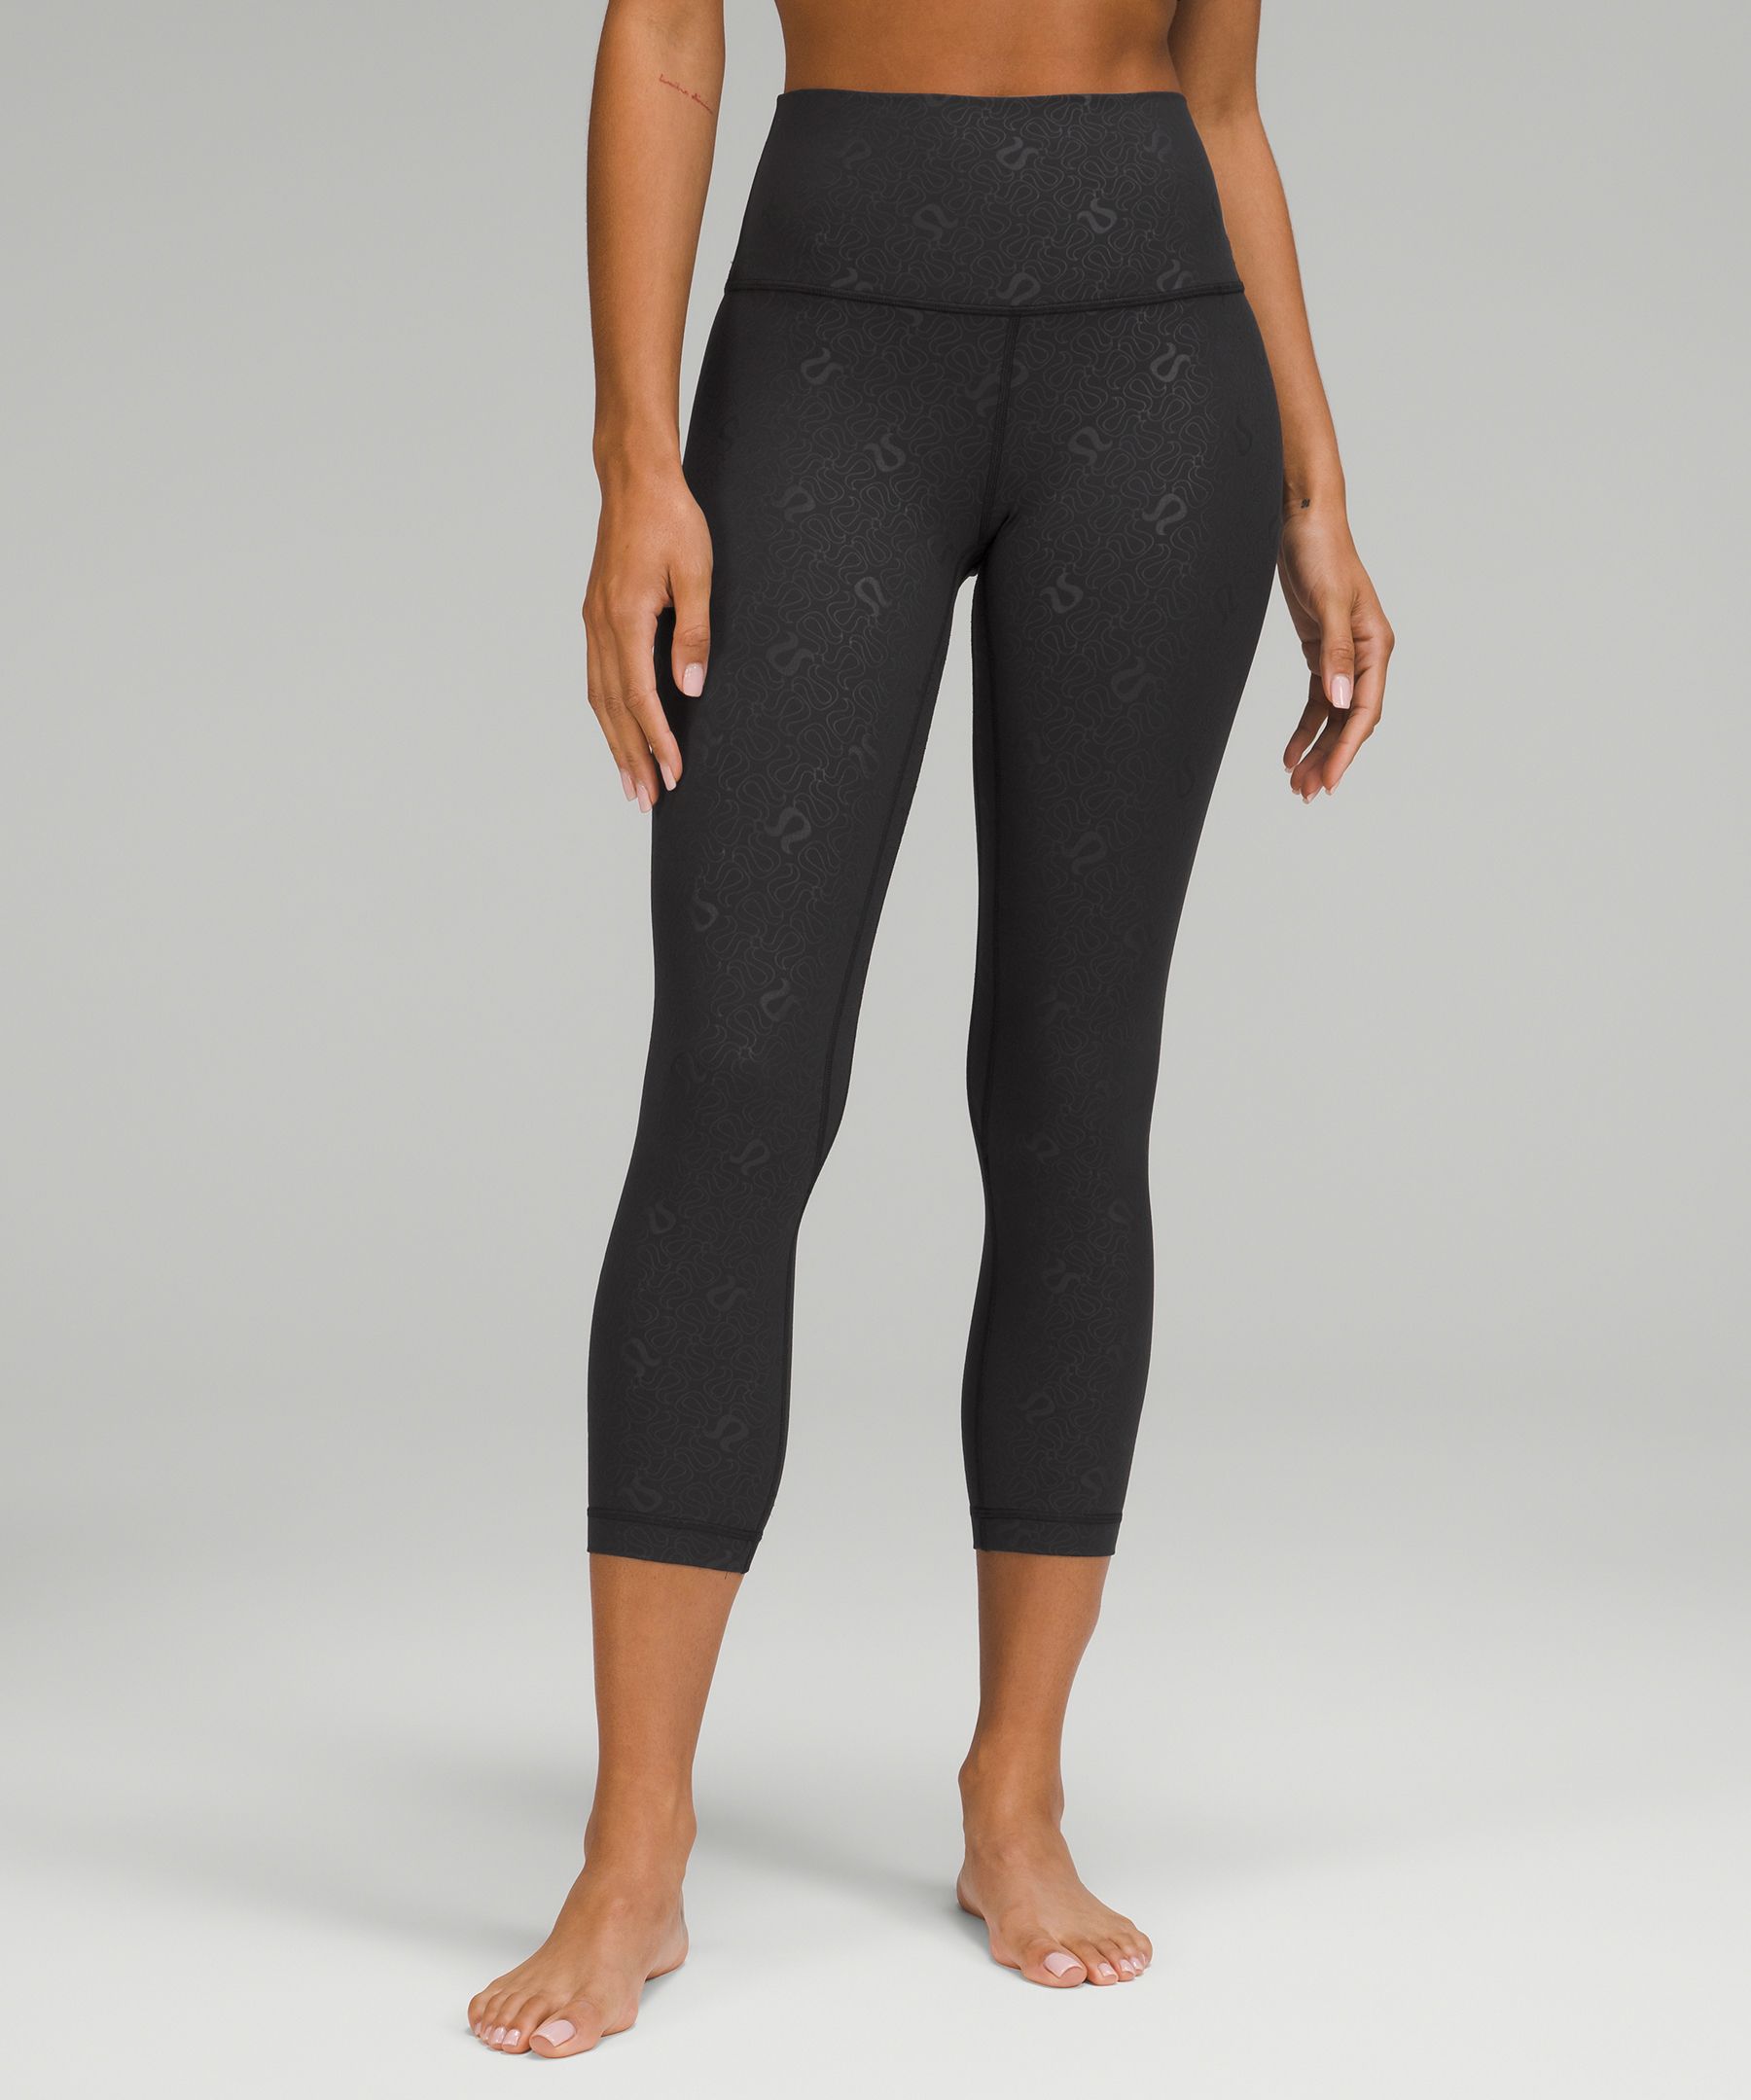 2023 Yoga Lu Align Womens Leggings Cropped High Waisted Running Shorts For  Yoga, Running, And Fitness From Outdoor0, $12.87